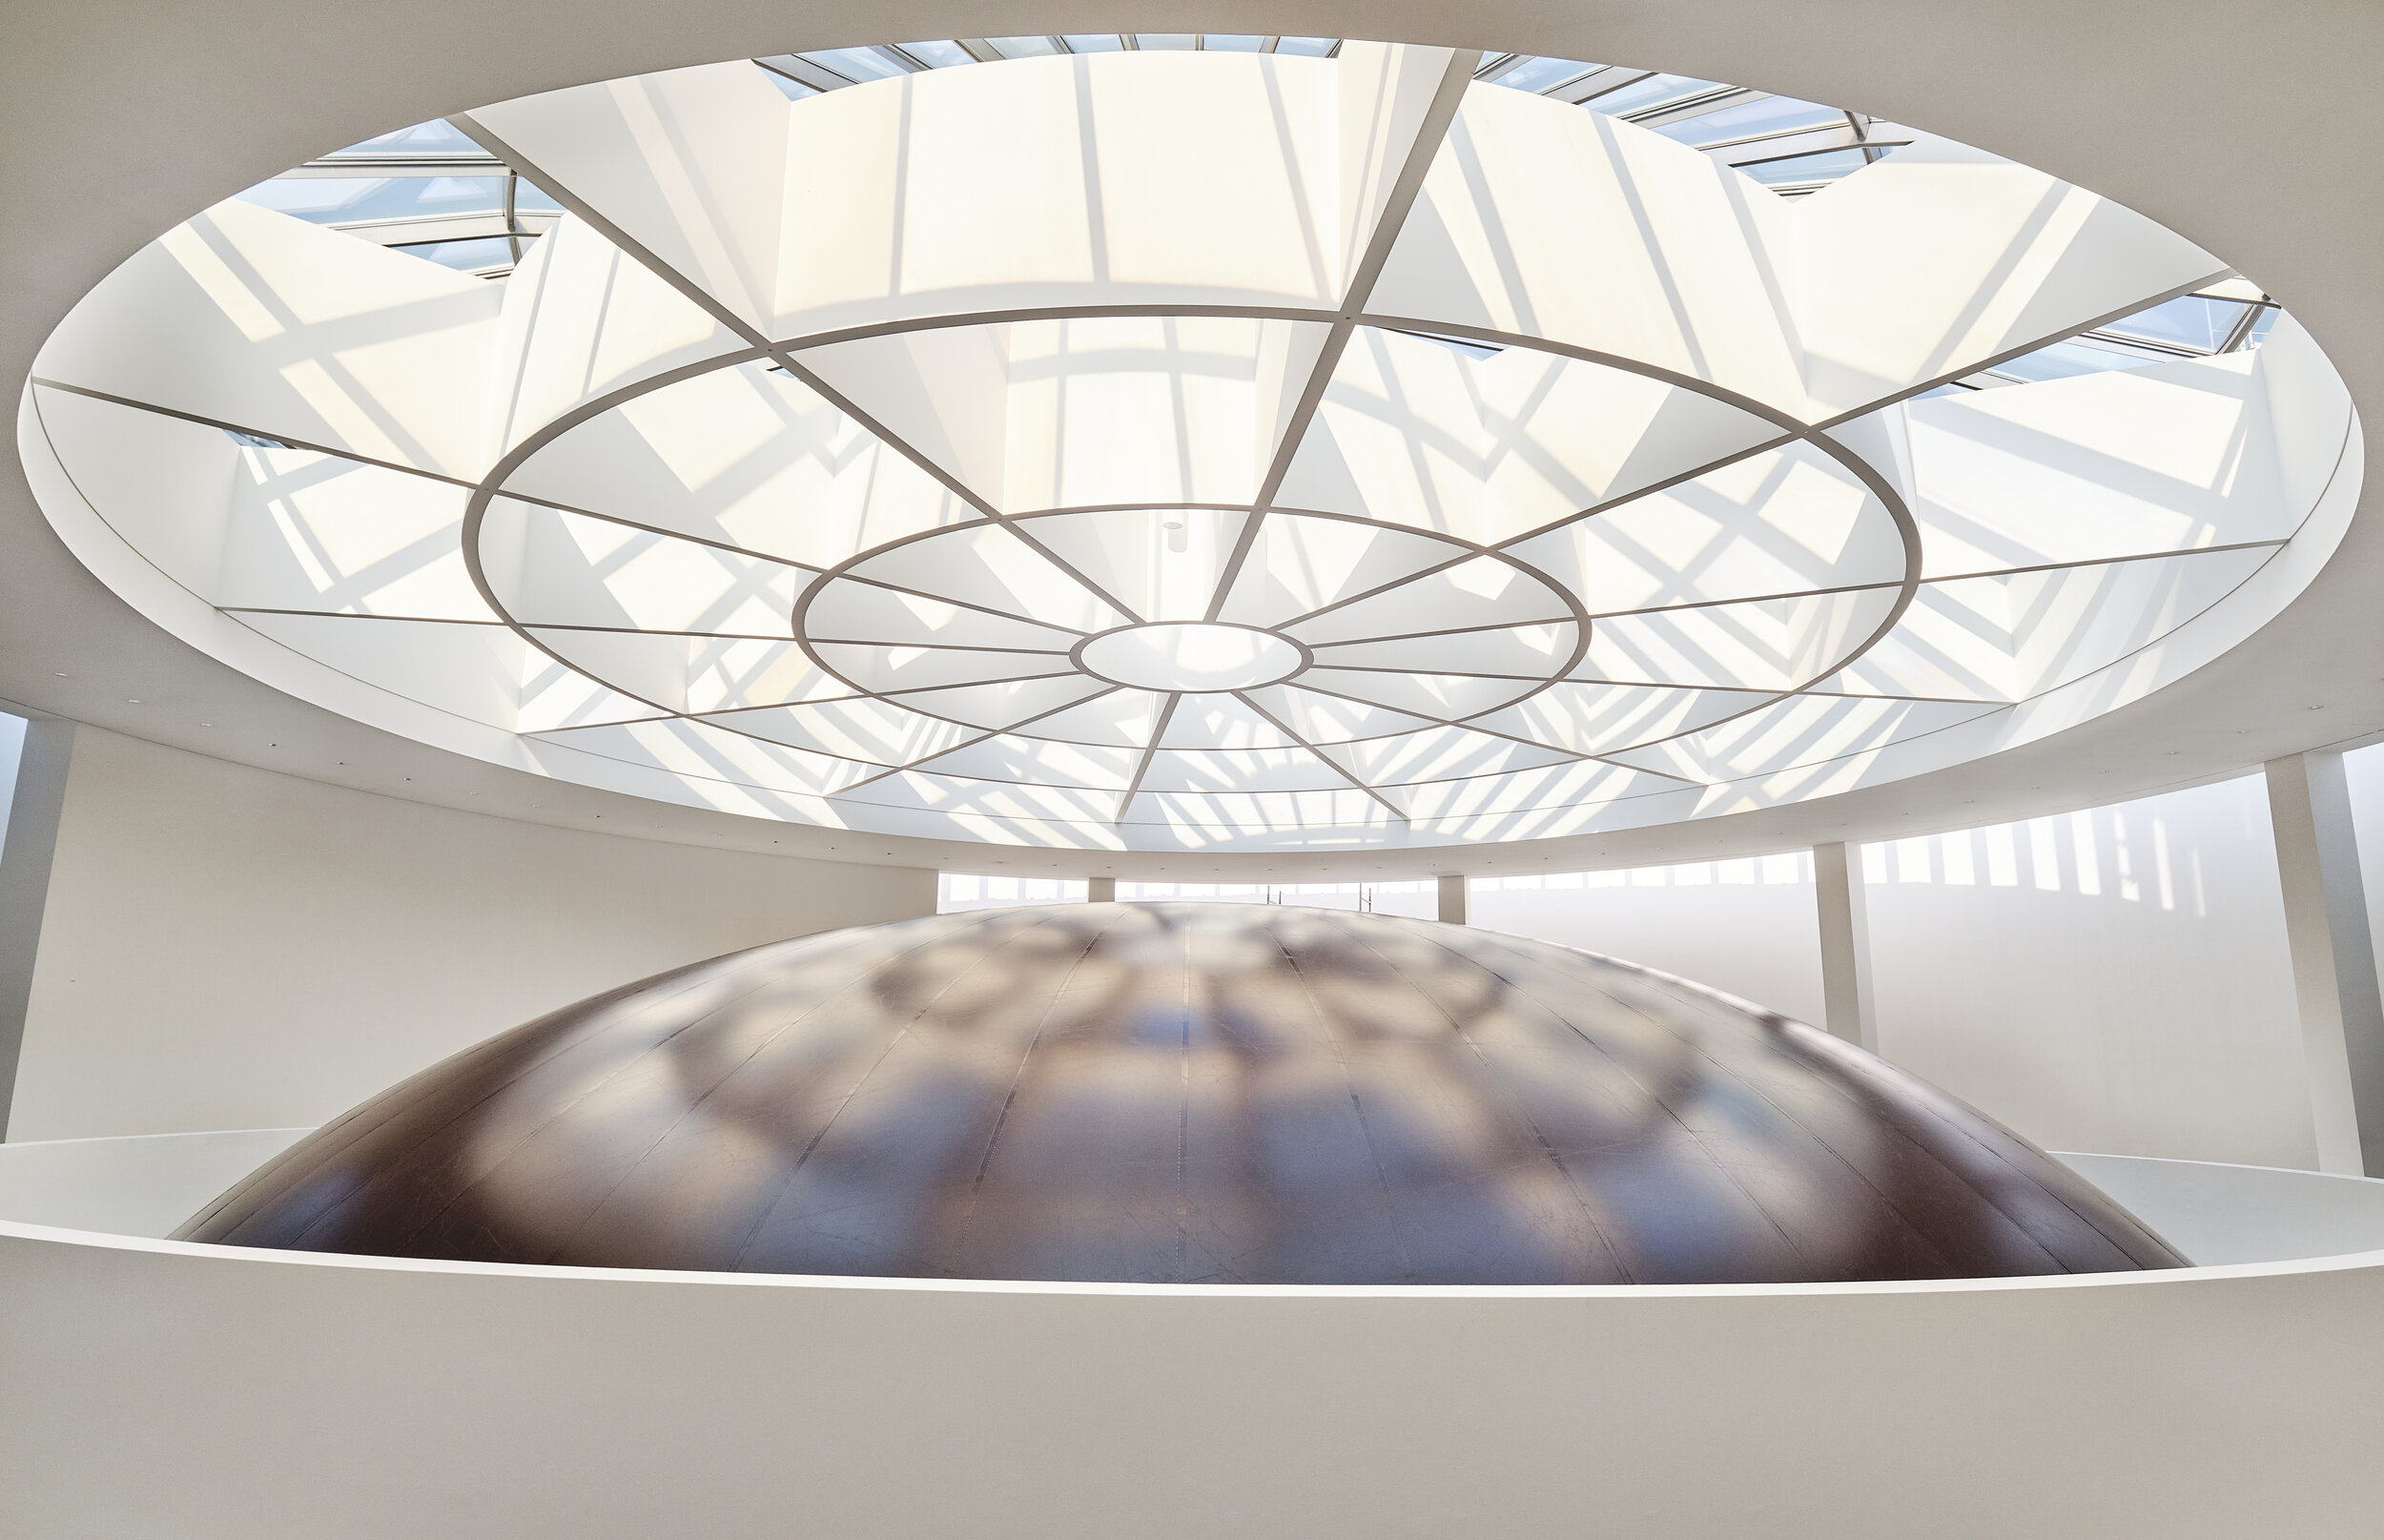   Pinakothek    A site specific sculpture temporarily installed within the entrance rotunda of the Pinakothek der Moderne, Munich, Germany in September 2020, to mark the 18 year anniversary of the museum opening.   Tensys undertook the fabric analysi